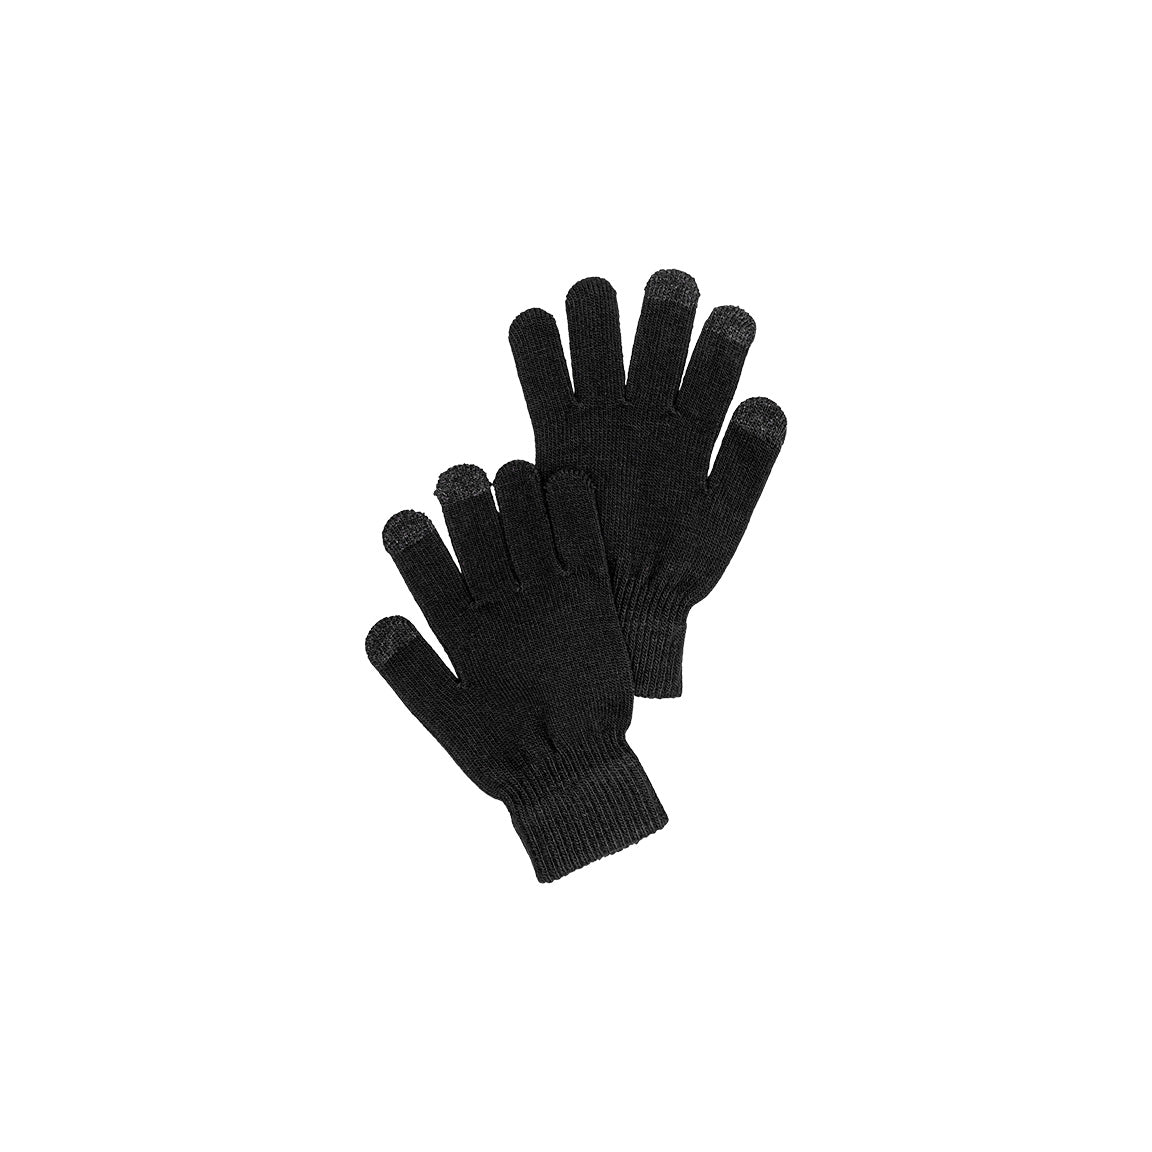 A pair of black knitted gloves with special touch screen compatible tips on the thumb, index, and middle fingers.